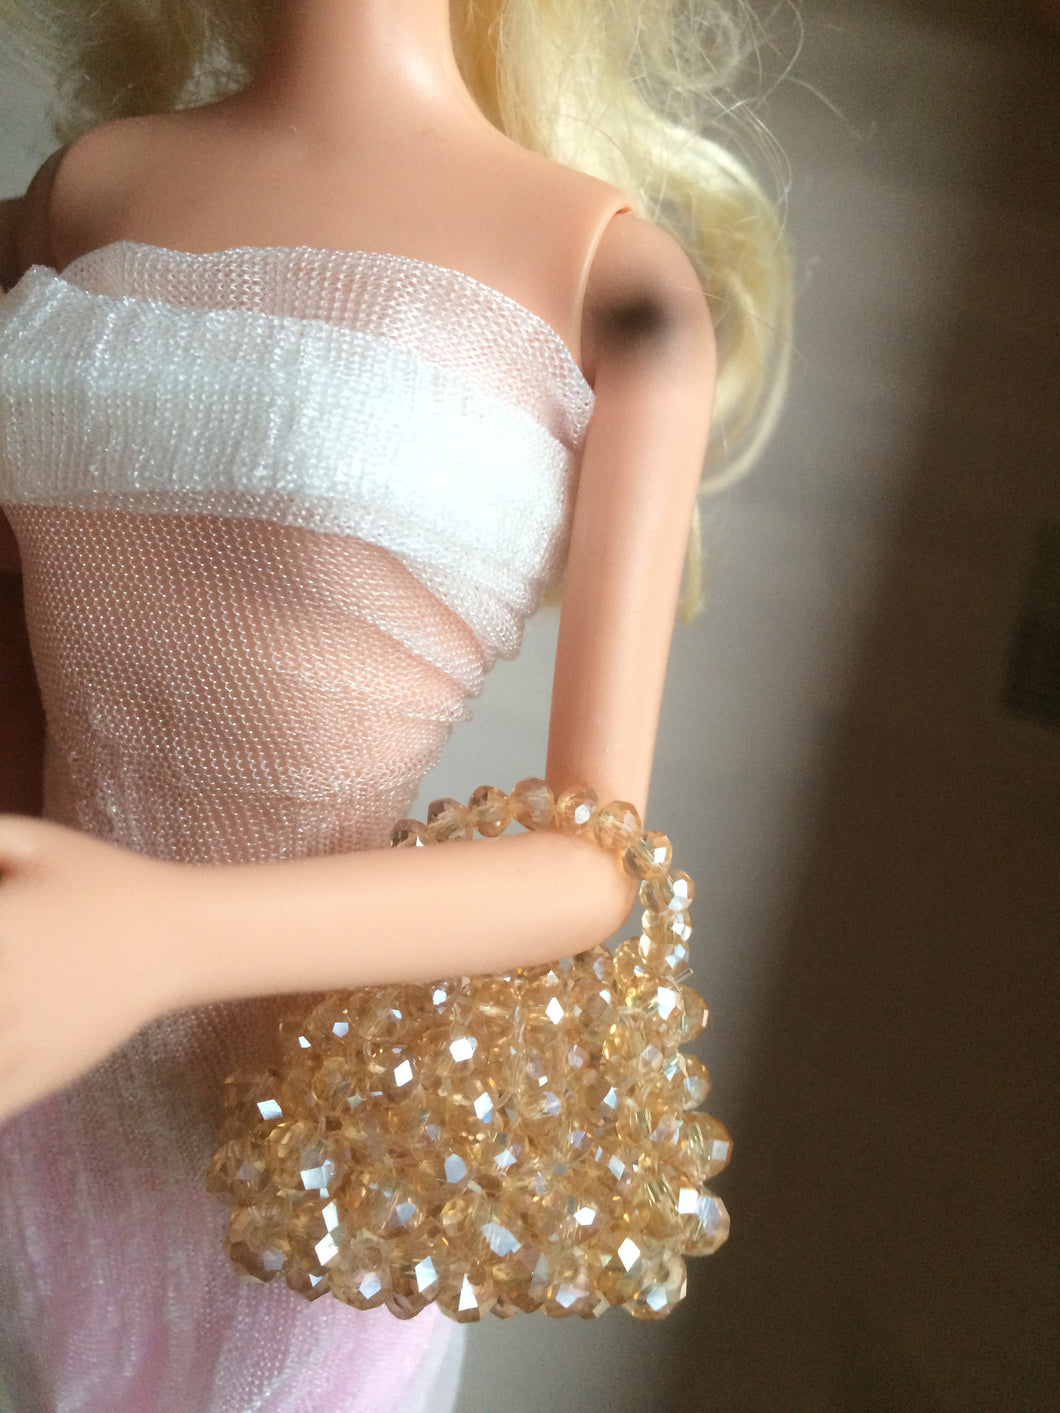 Crystal fancy little handbag/purse for 11.5 inches doll CB17 (Add on item, not sale individually.)